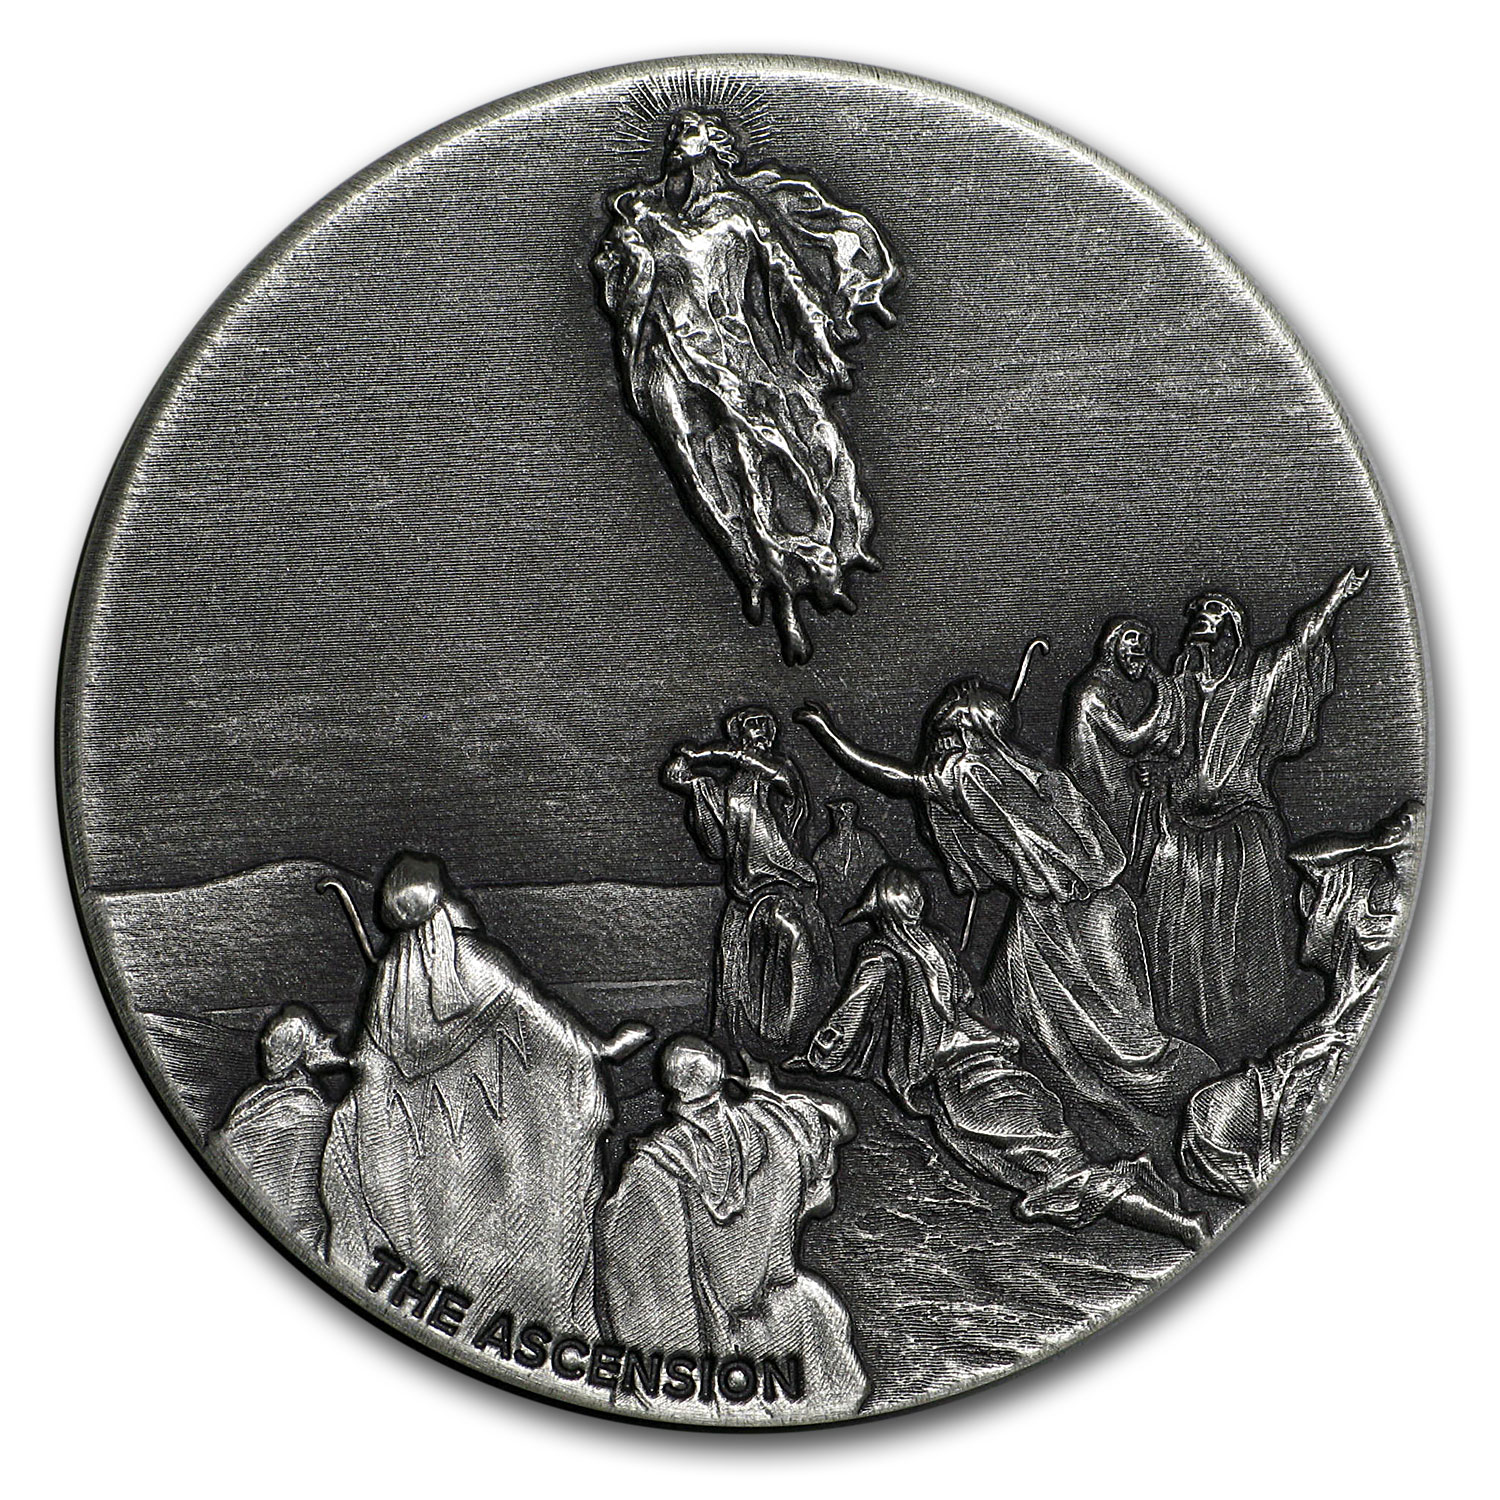 Buy 2018 2 oz Silver Coin - Biblical Series (Ascension of Christ) - Click Image to Close